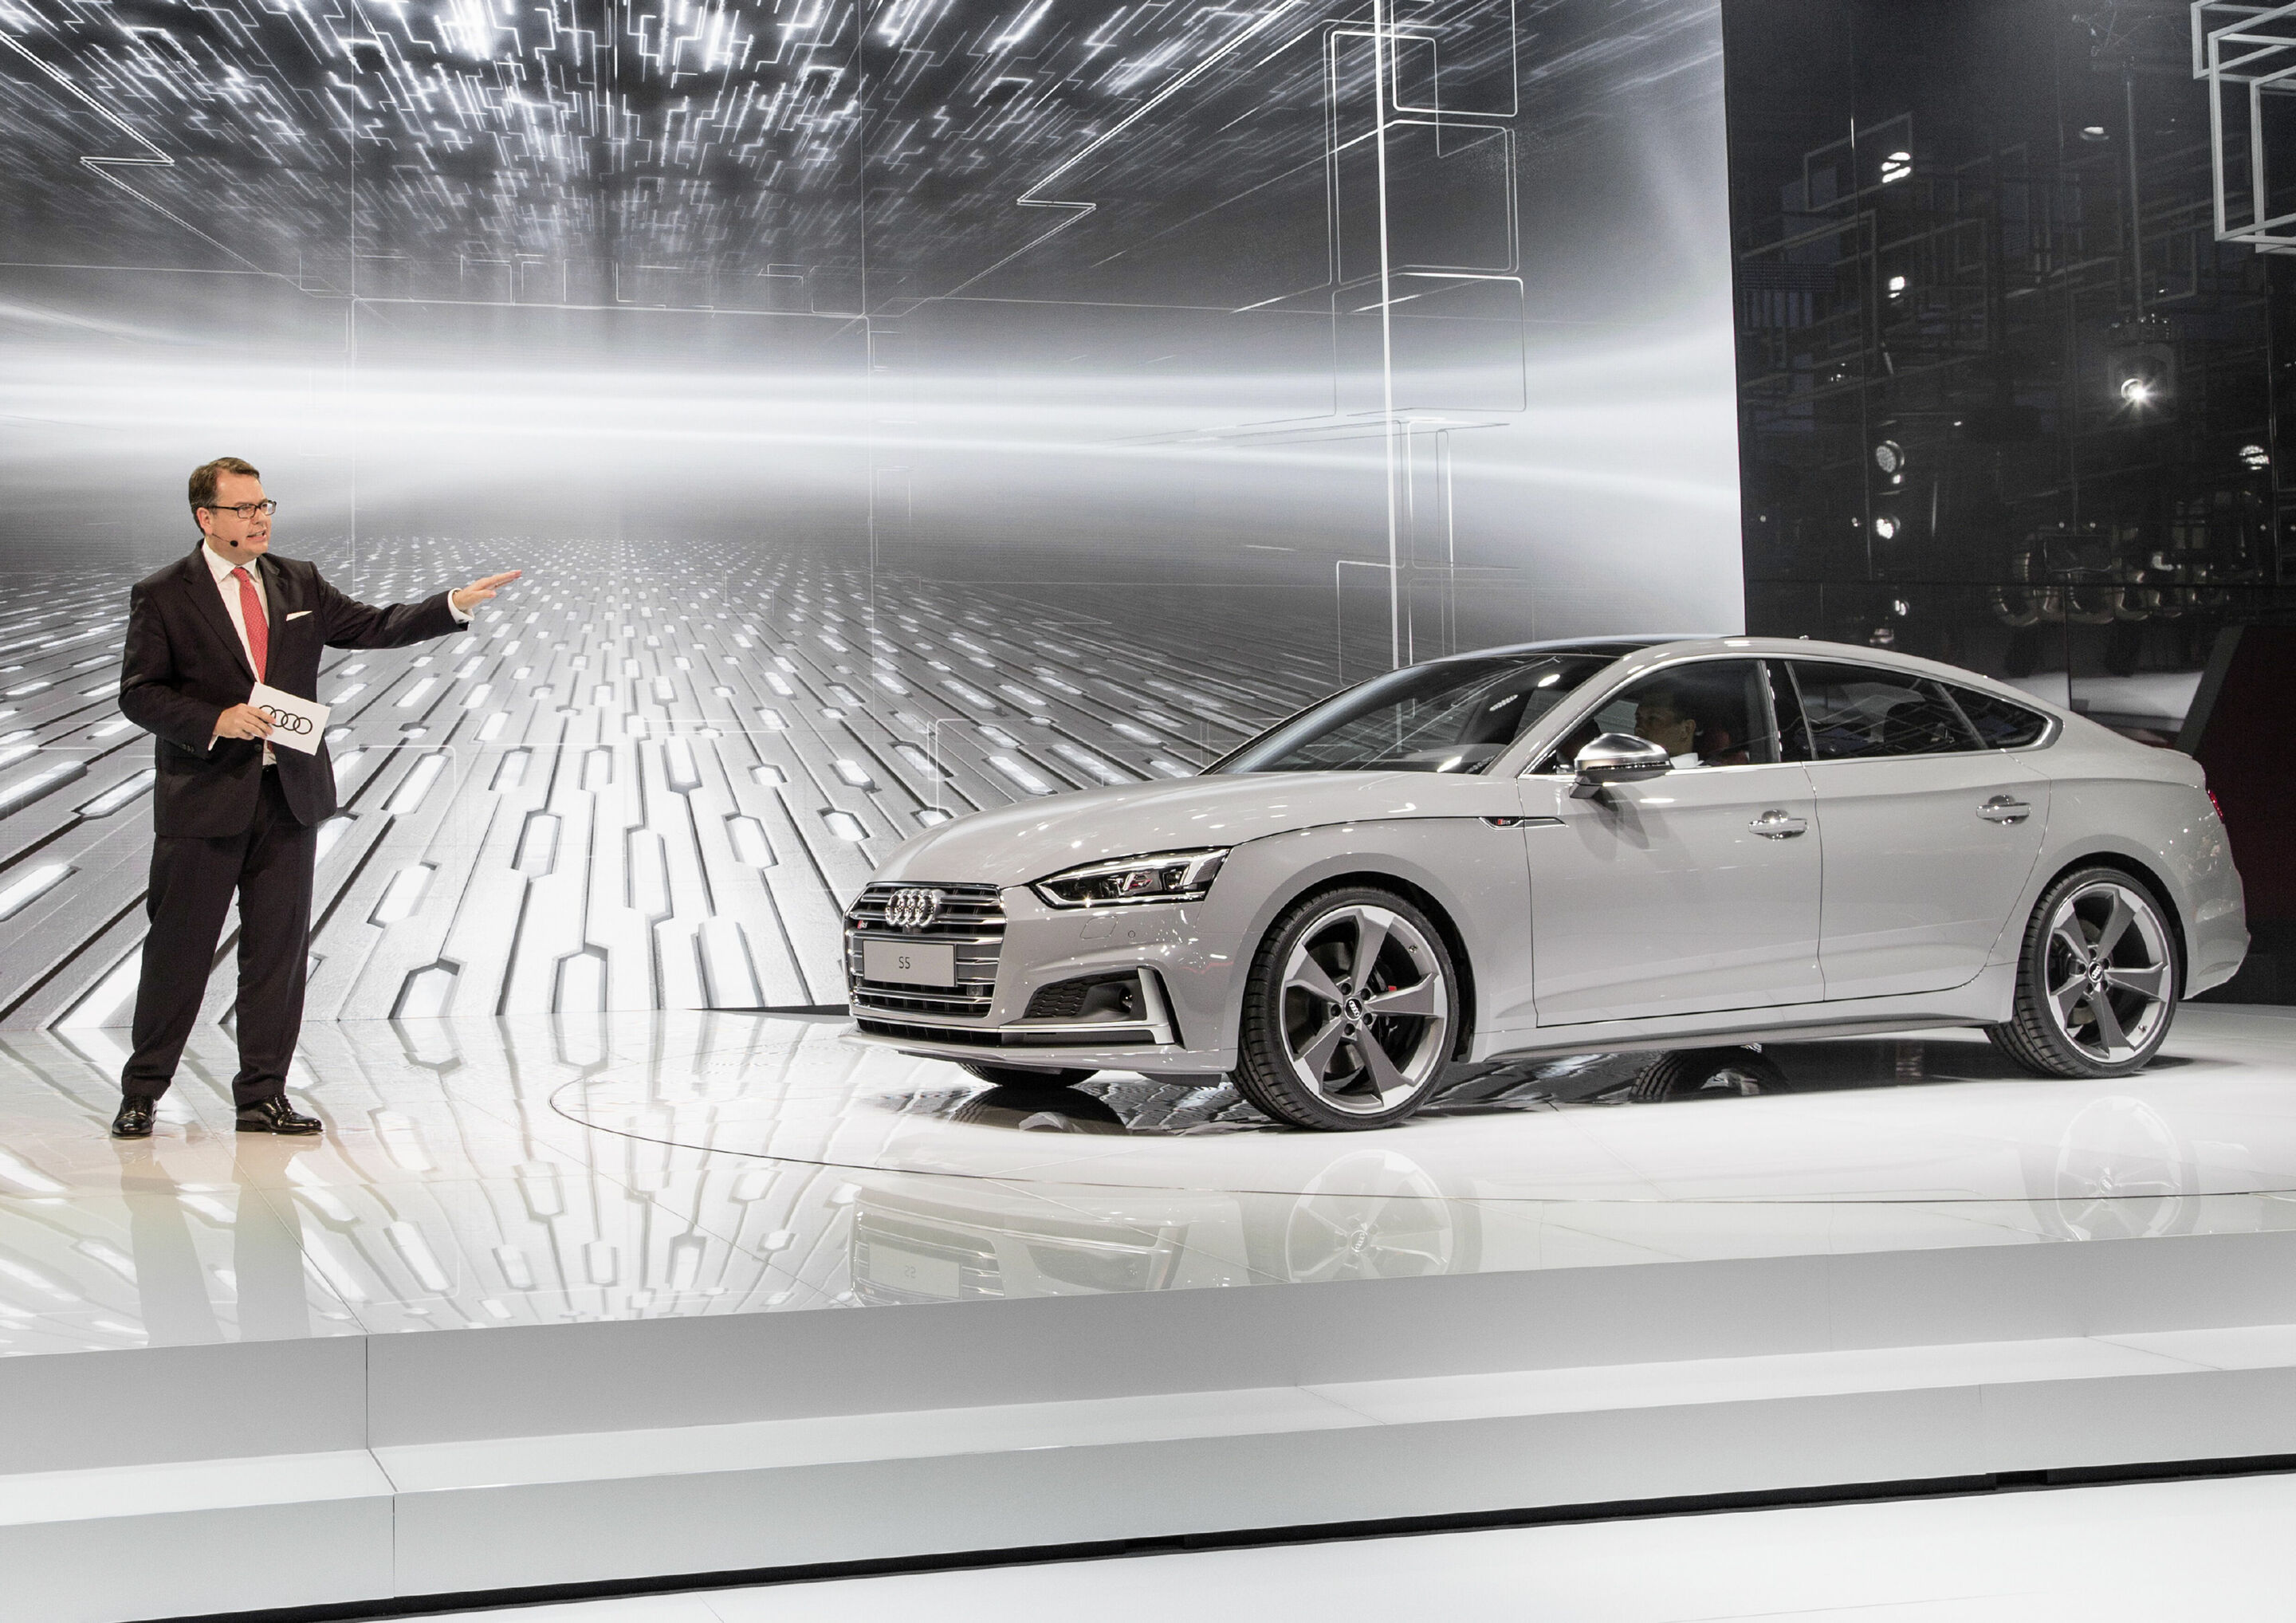 Dr. Dietmar Voggenreiter (Member of the Board of Management of AUDI AG for Sales and Marketing) in front of the new Audi S5 Sportback at the Paris Motor Show 2016